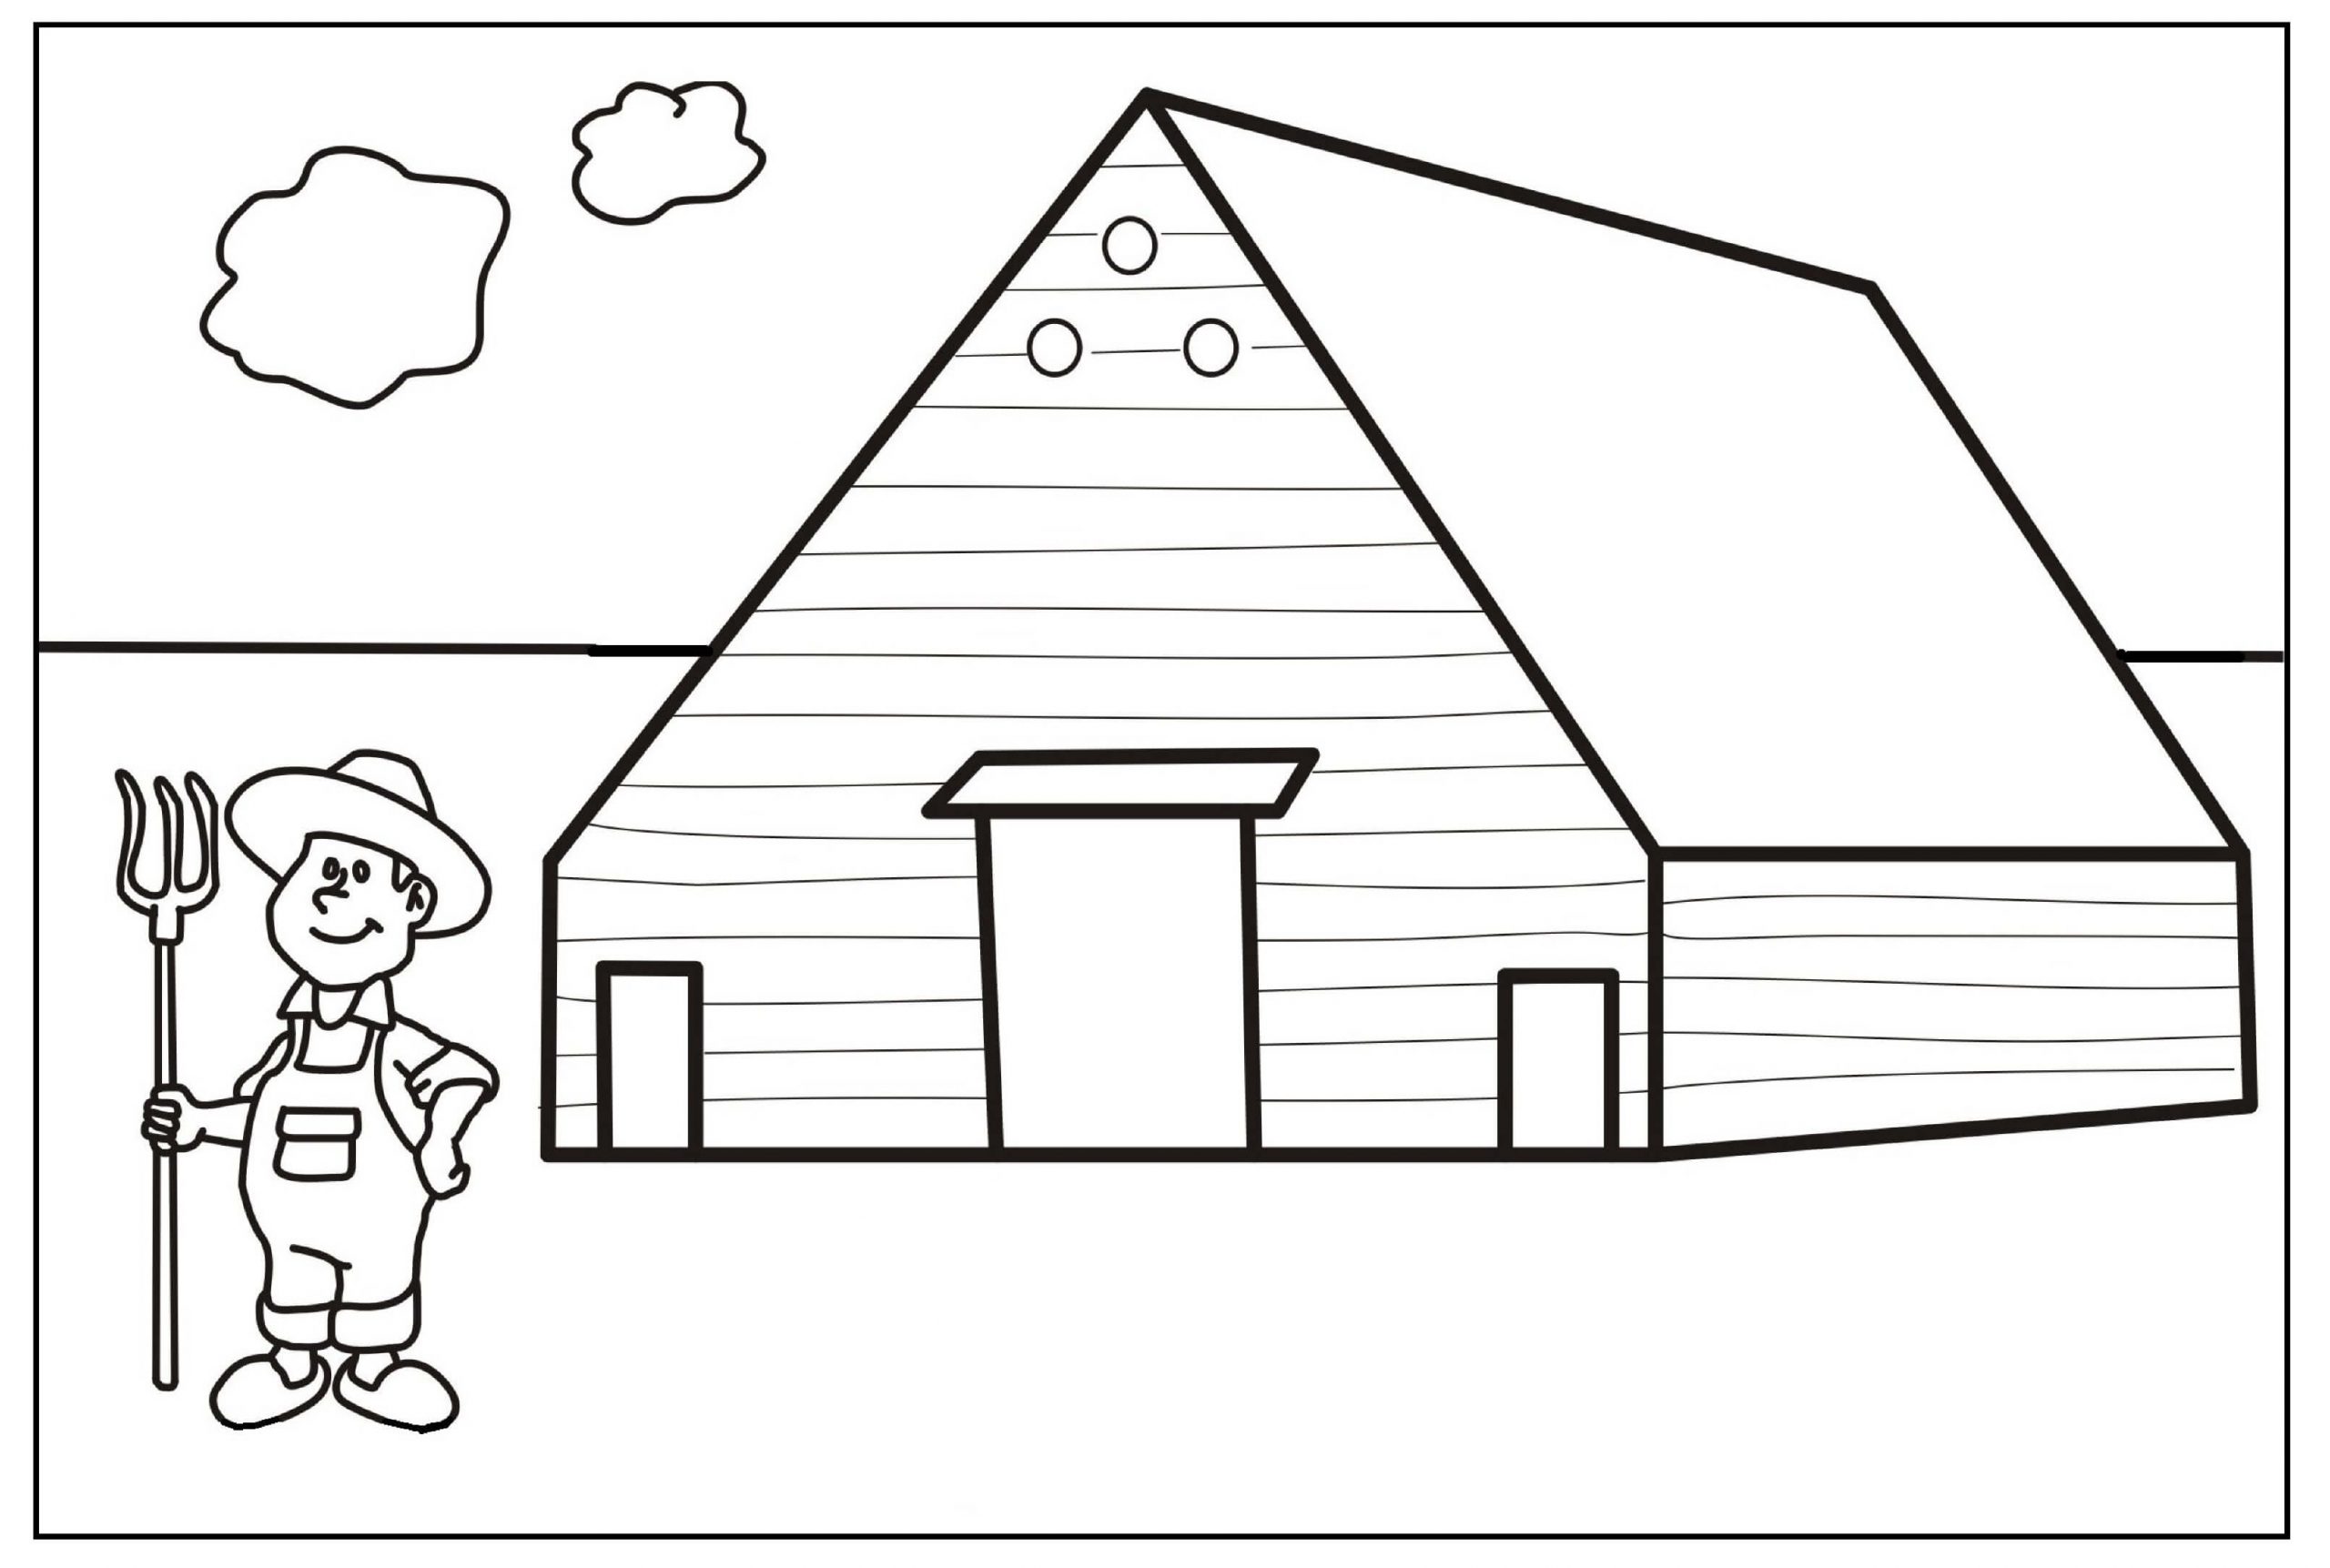 Farmer and House in a Farm Coloring Page